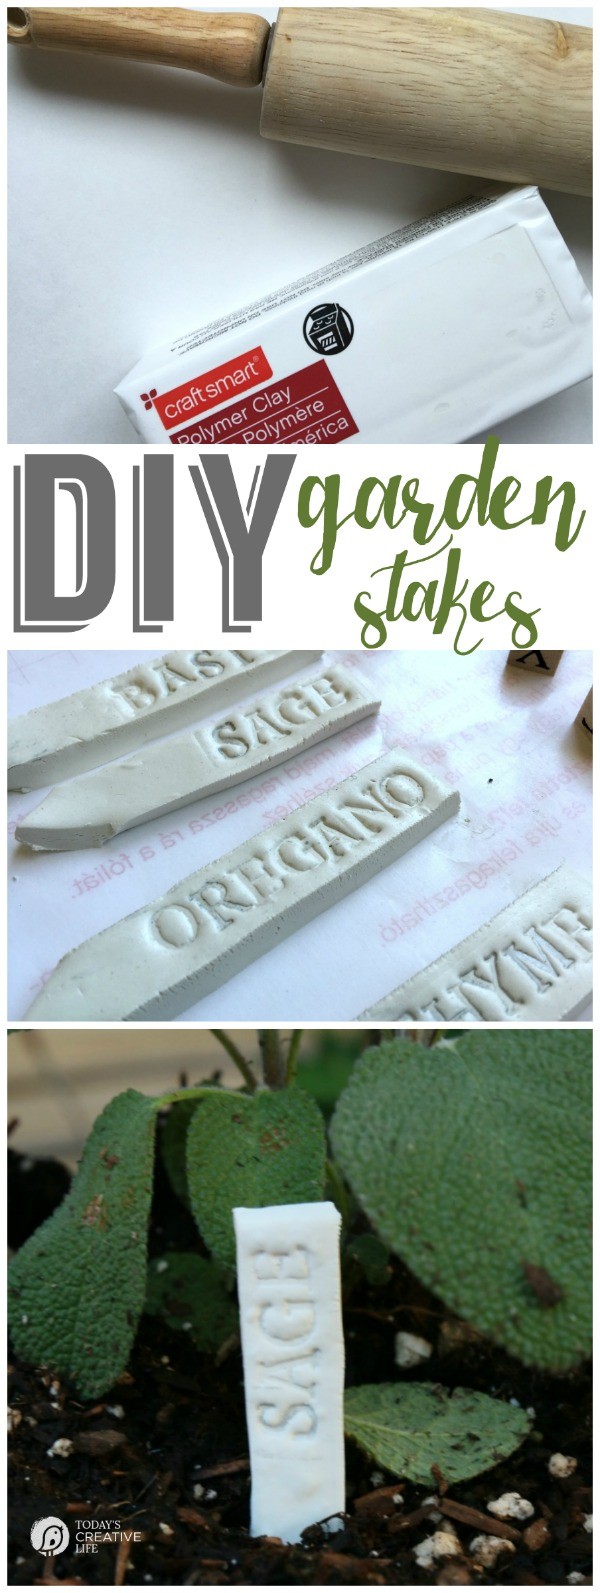 Planting an Herb Garden | Create a unique herb garden using an old fountain and eco scraps potting soil. Make your own DIY garden stakes from polymer clay for an easy craft. Tutorial on TodaysCreativeLife.com